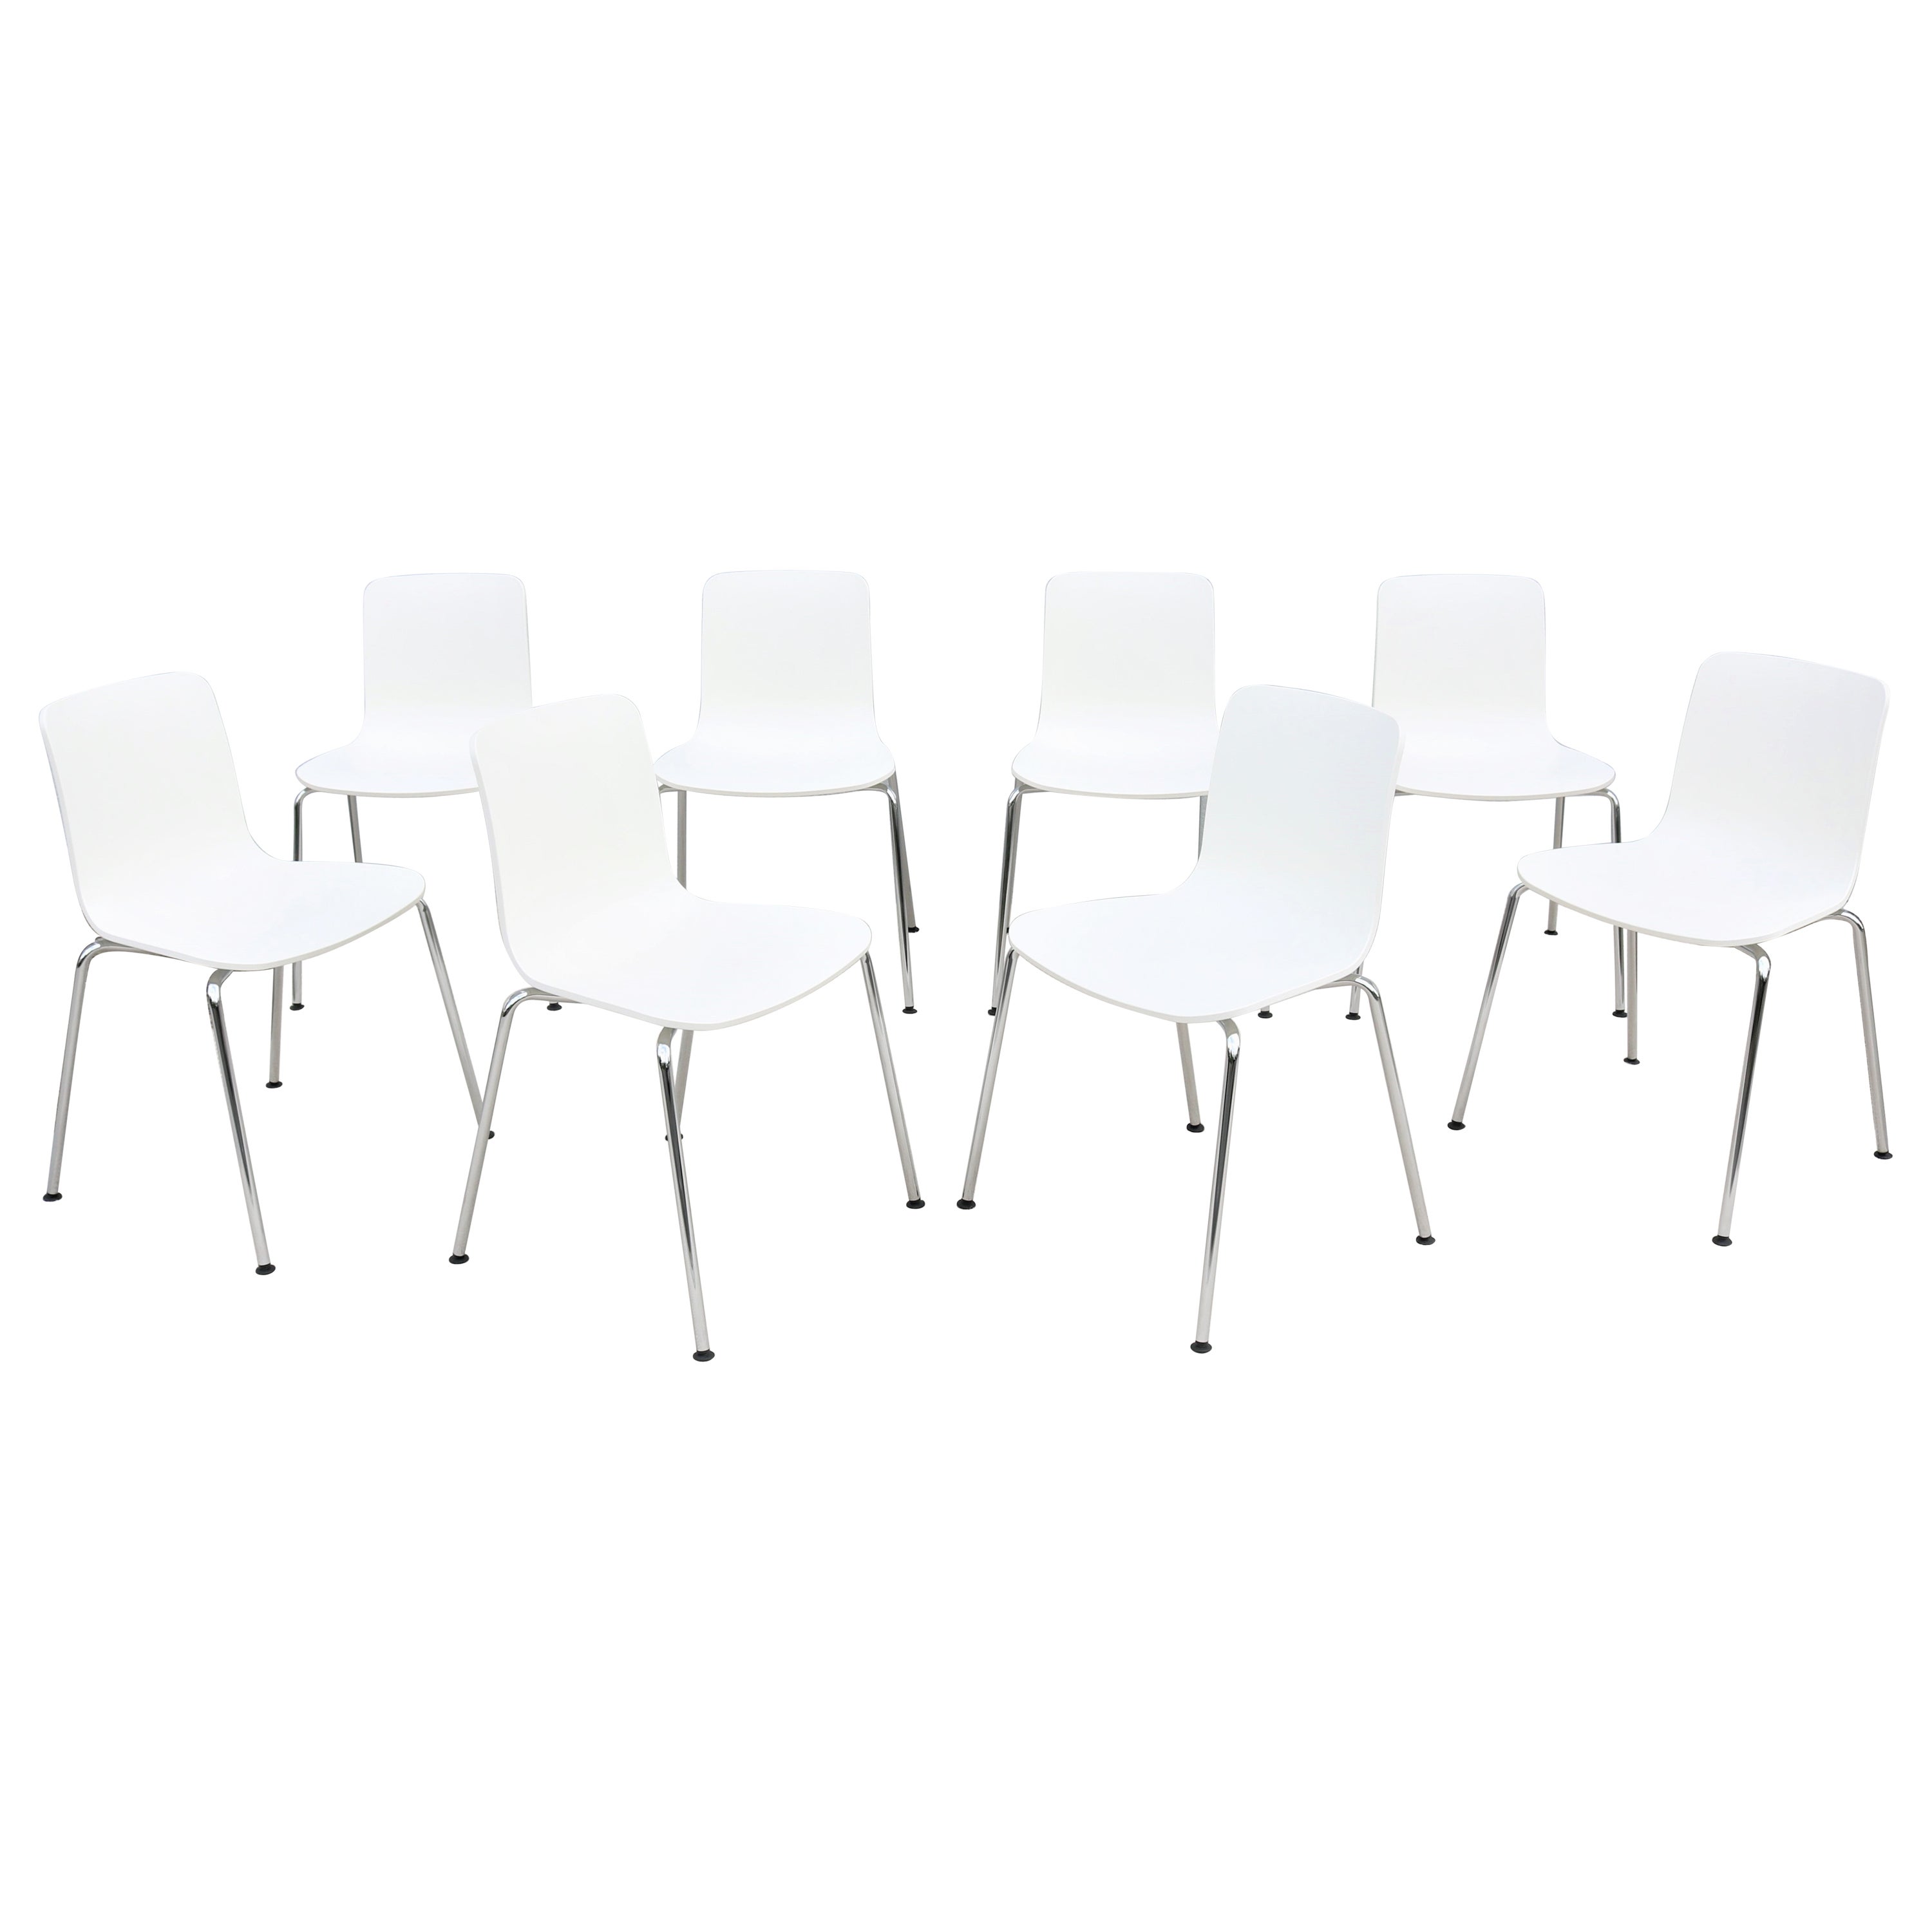 Modern Italy Jasper Morrison for Vitra HAL Tube Stackable Dining Chairs Set of 8